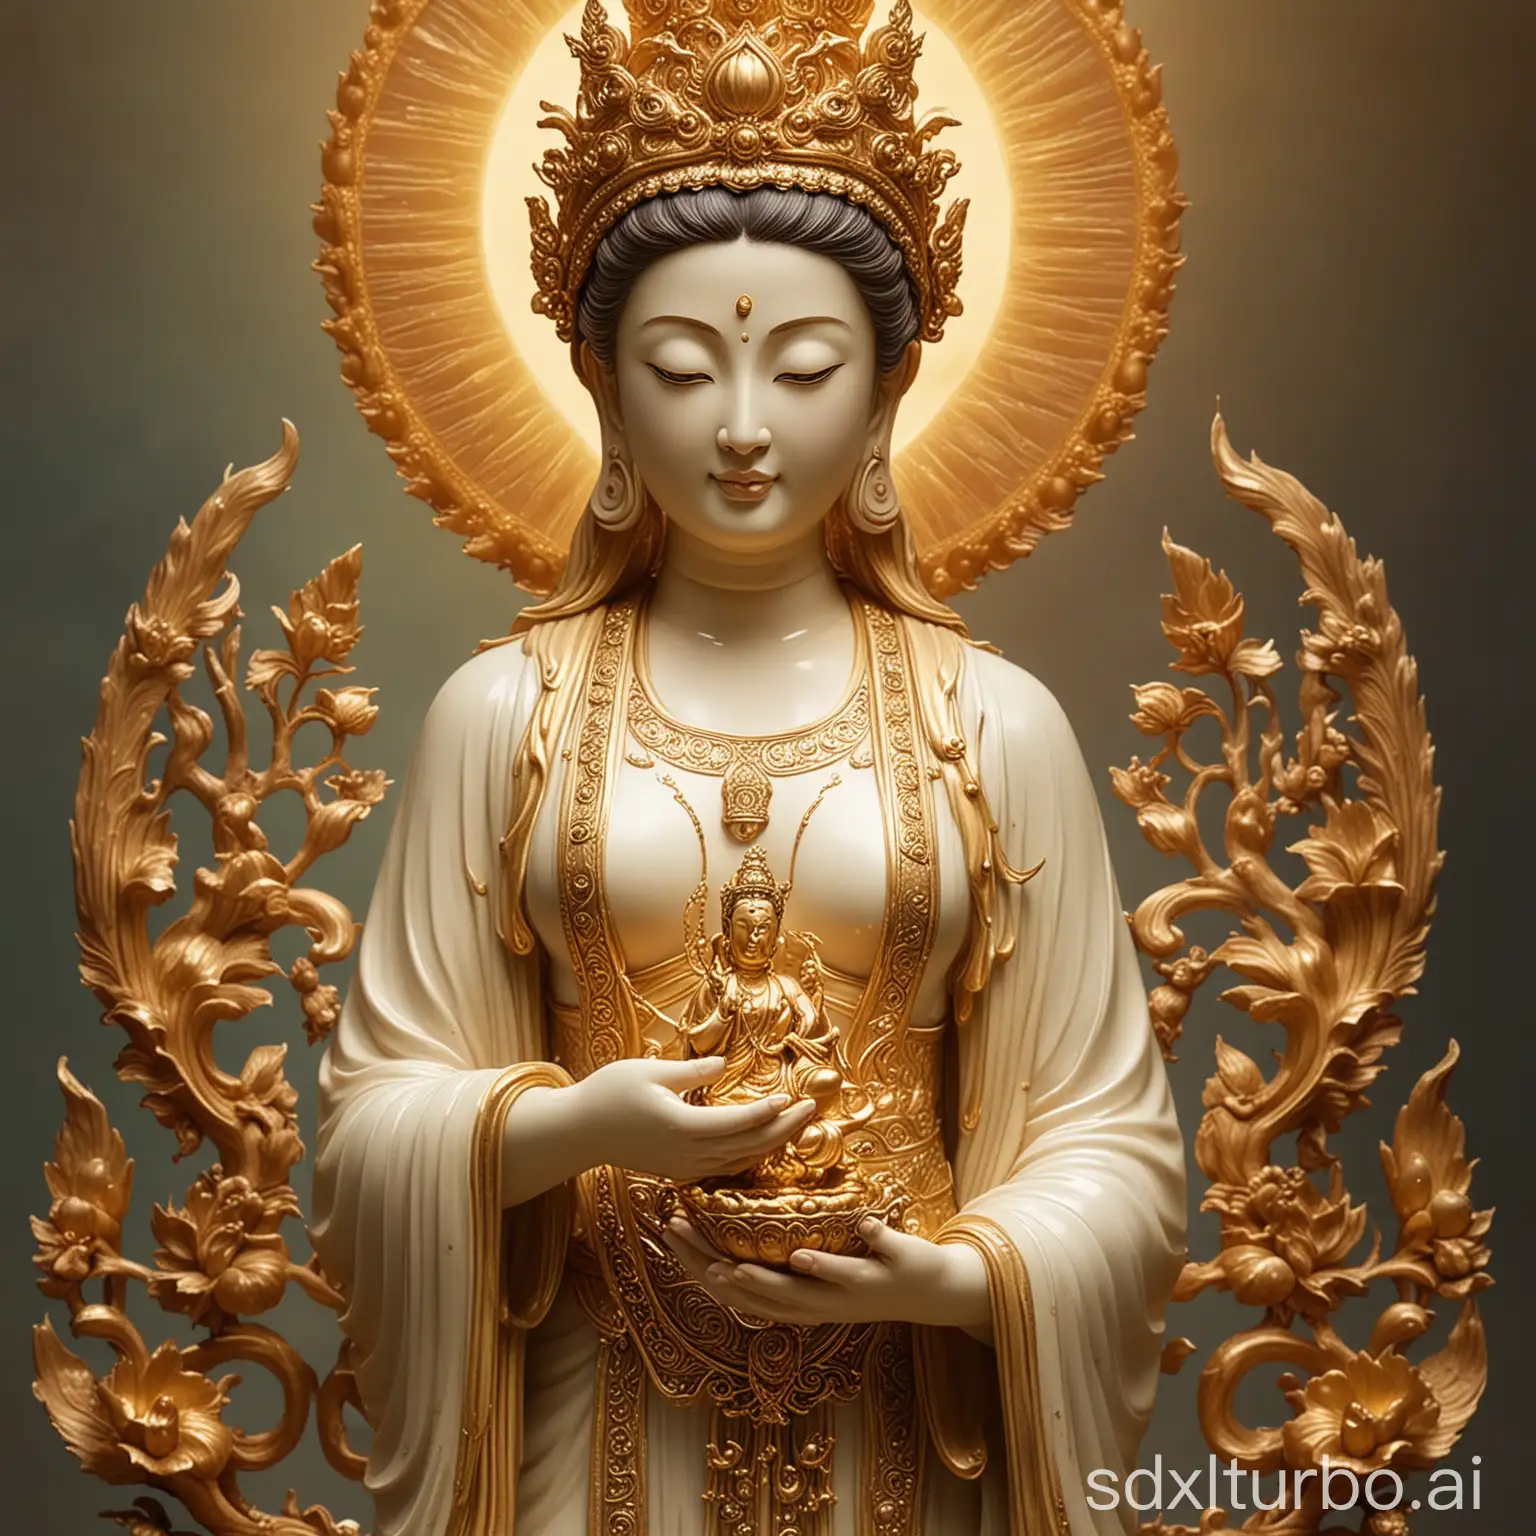 Guanyin Bodhisattva holding a treasure, with a background of Buddha's radiance shining, full-body image, various gentle and large eyes, delicate features.